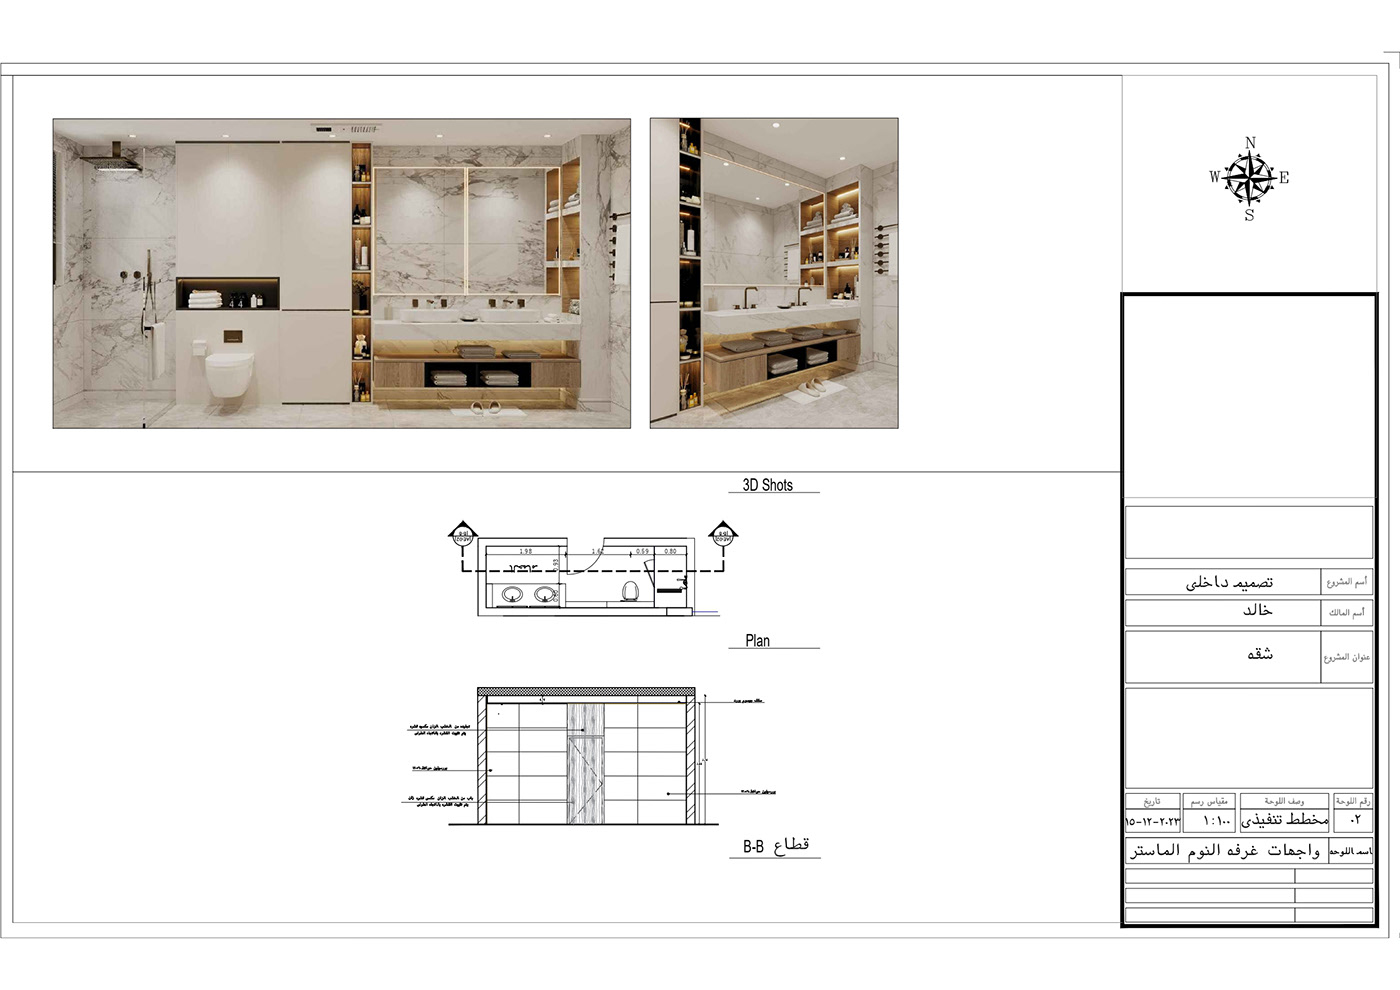 shop drawing technical drawing architectural design architecture interior design  exterior 3ds max